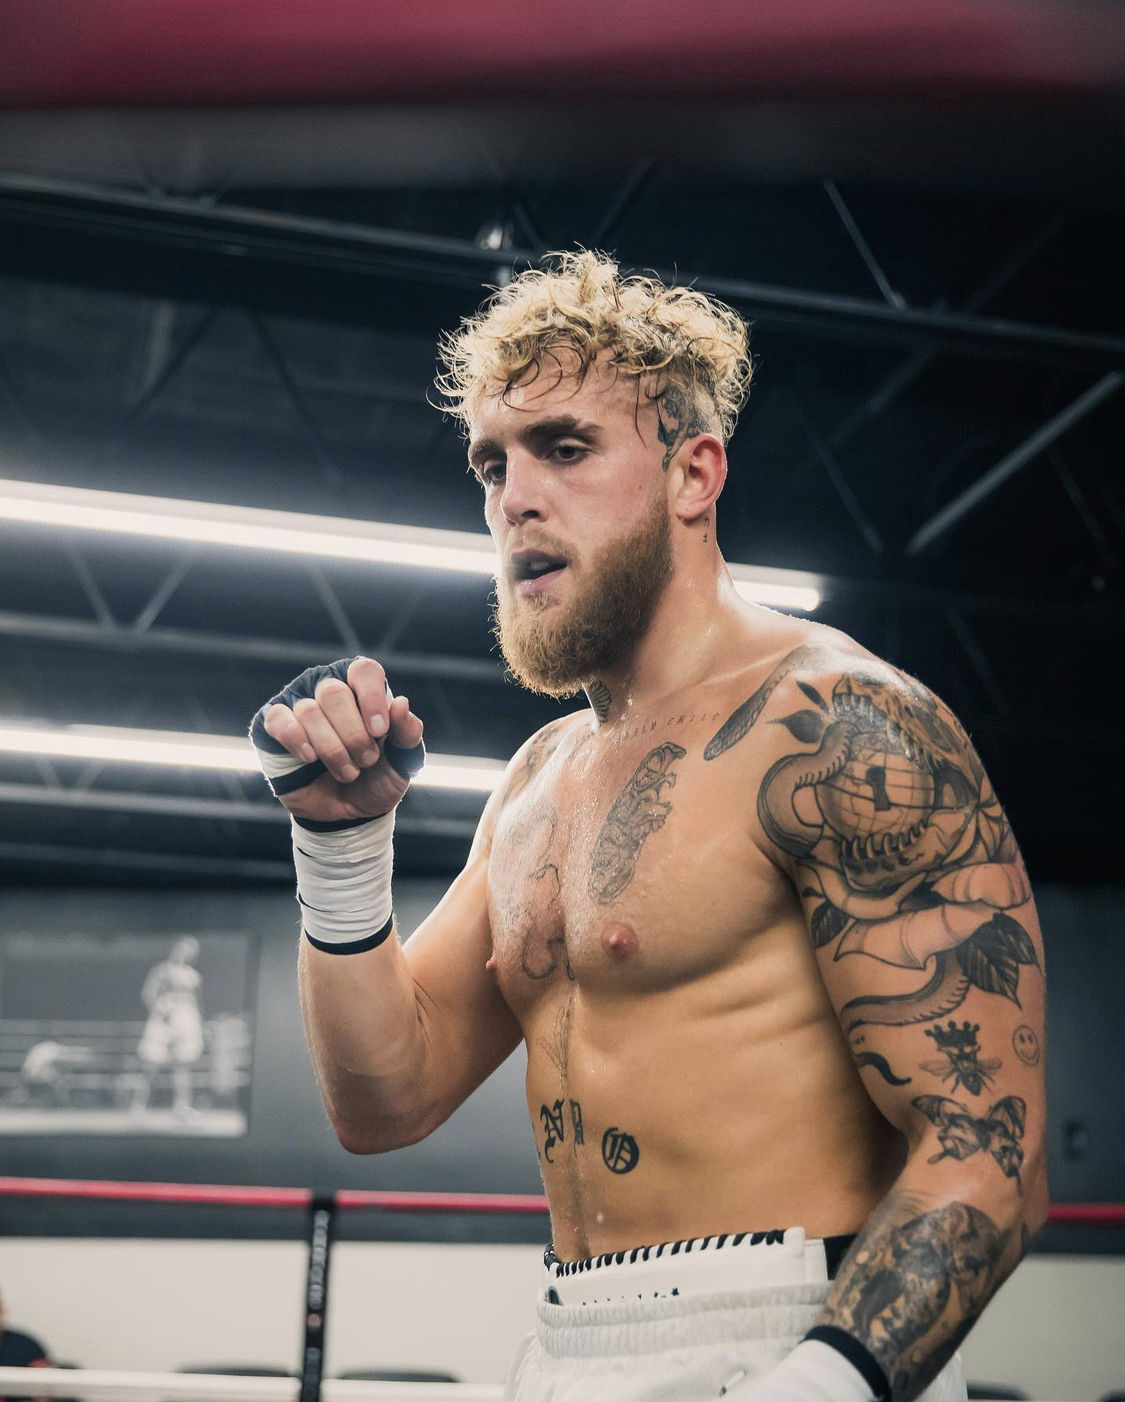 Jake Paul's training camp for Tyron Woodley ex-UFC star, including sparring 150 rounds with ex-world champions